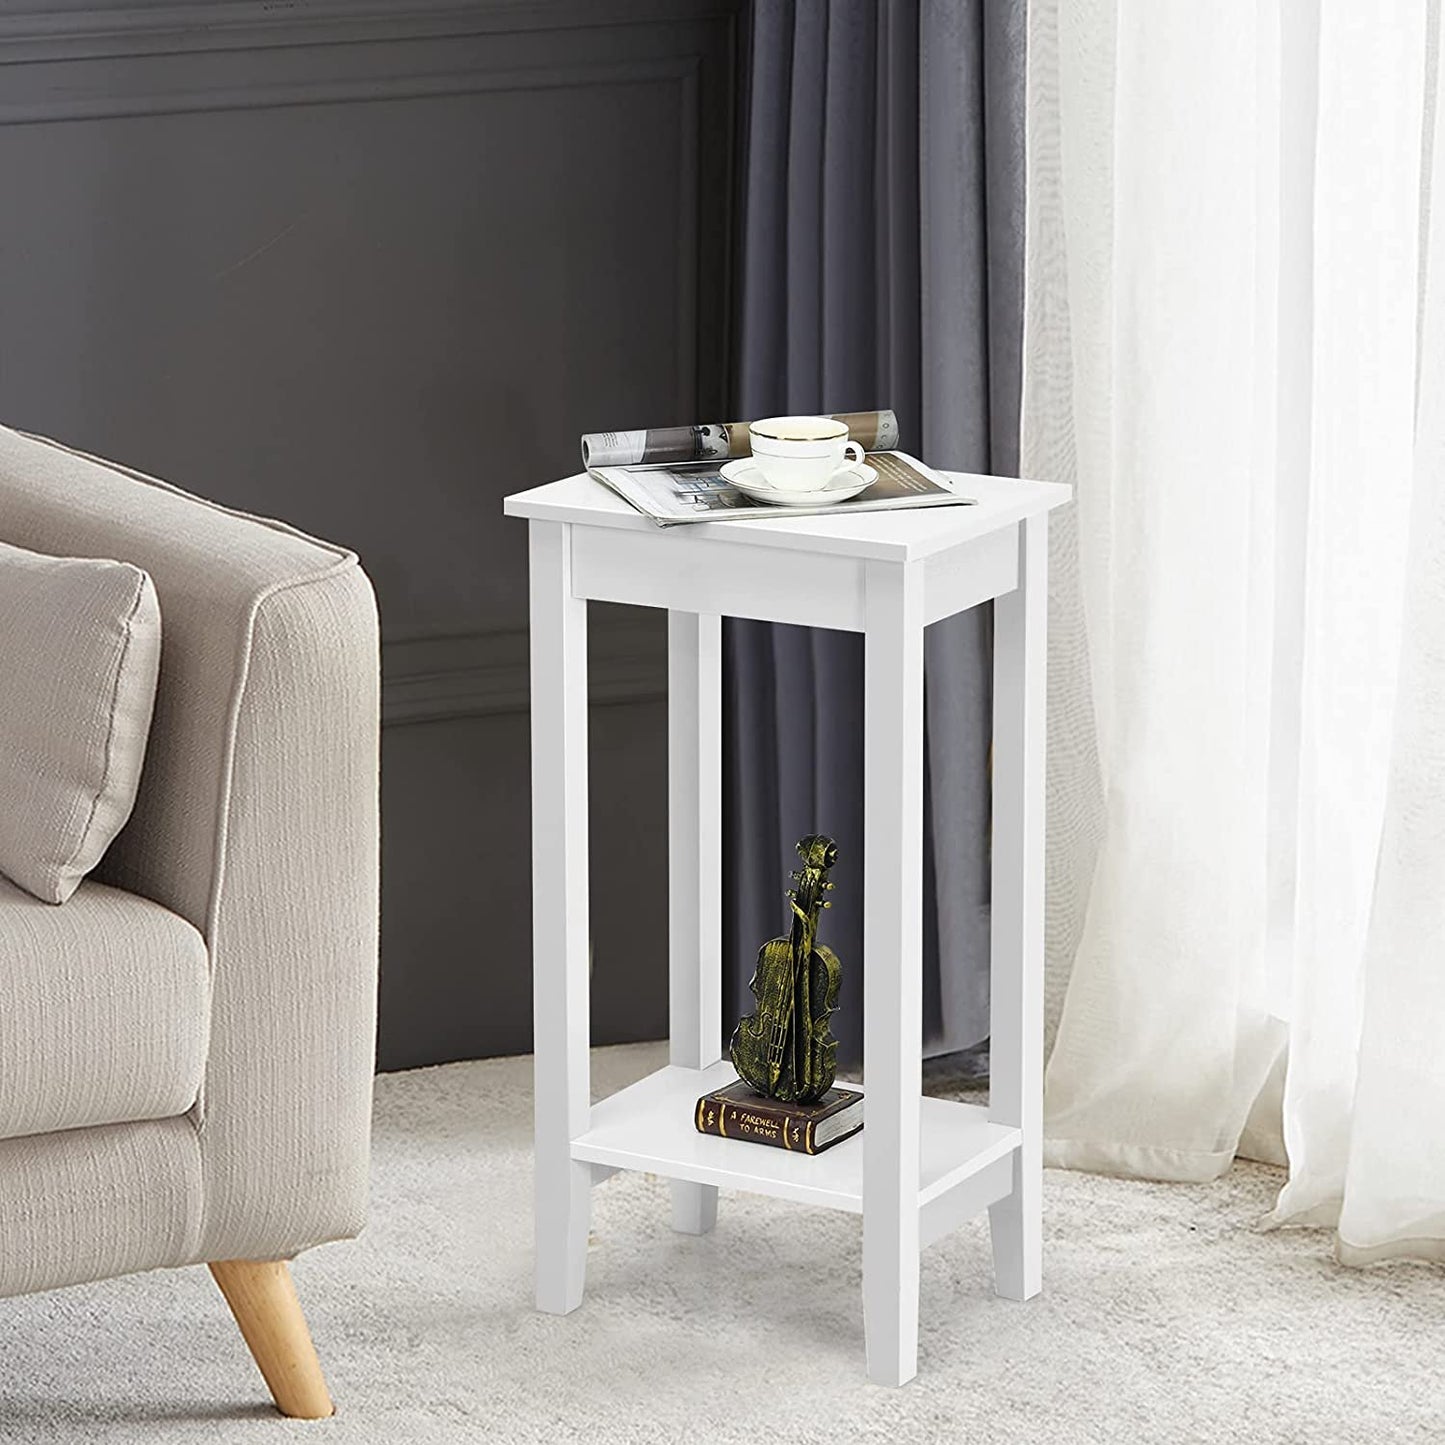 Set of 2 Versatile 2-Tier End Table with Storage Shelf, White